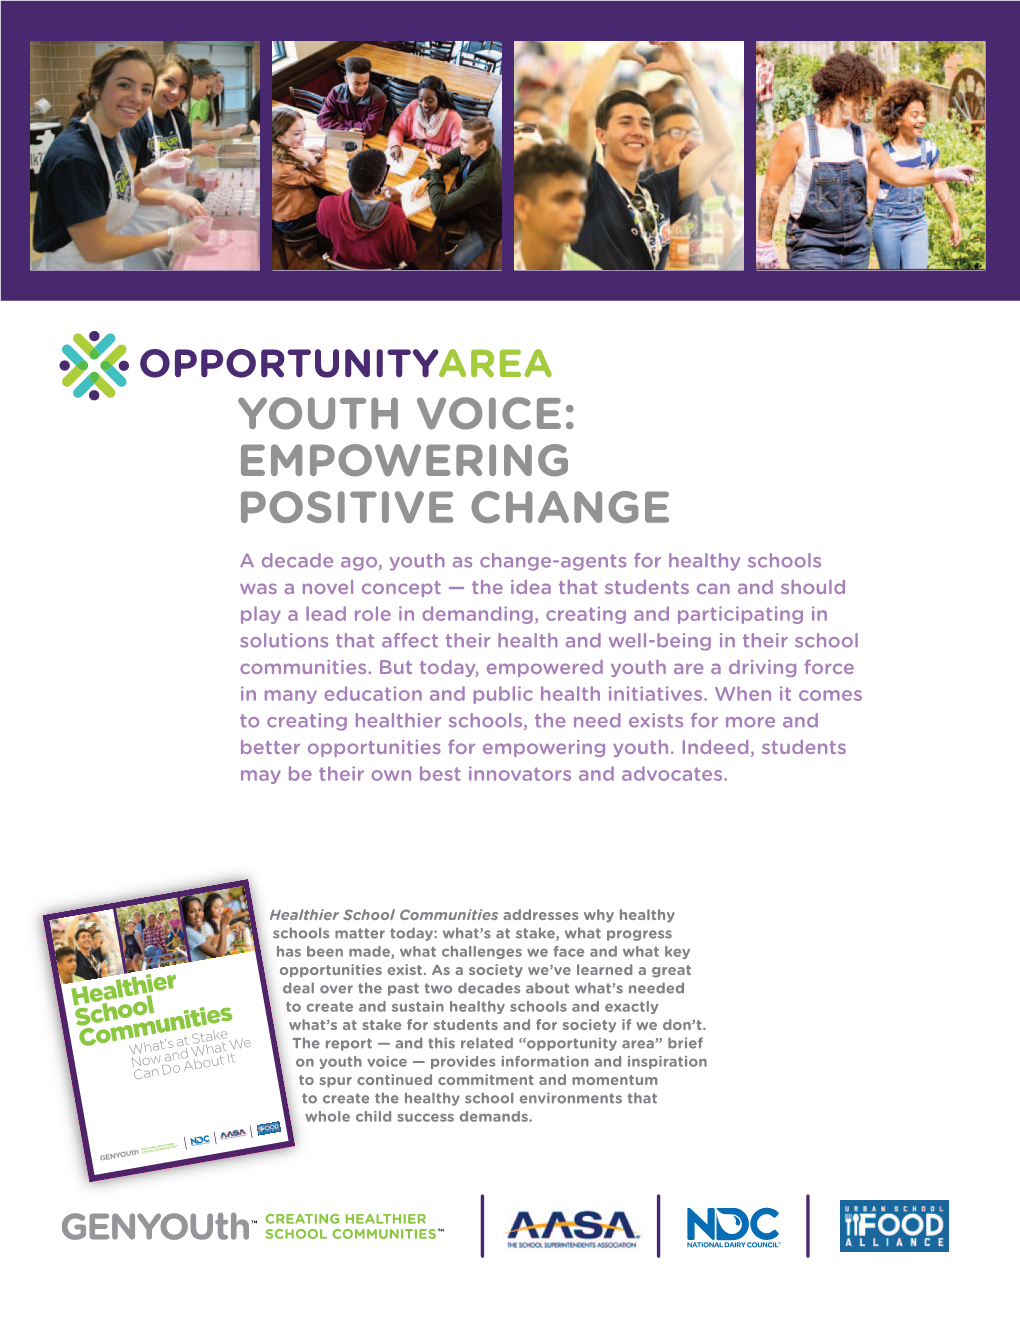 Youth Voice: Empowering Positive Change